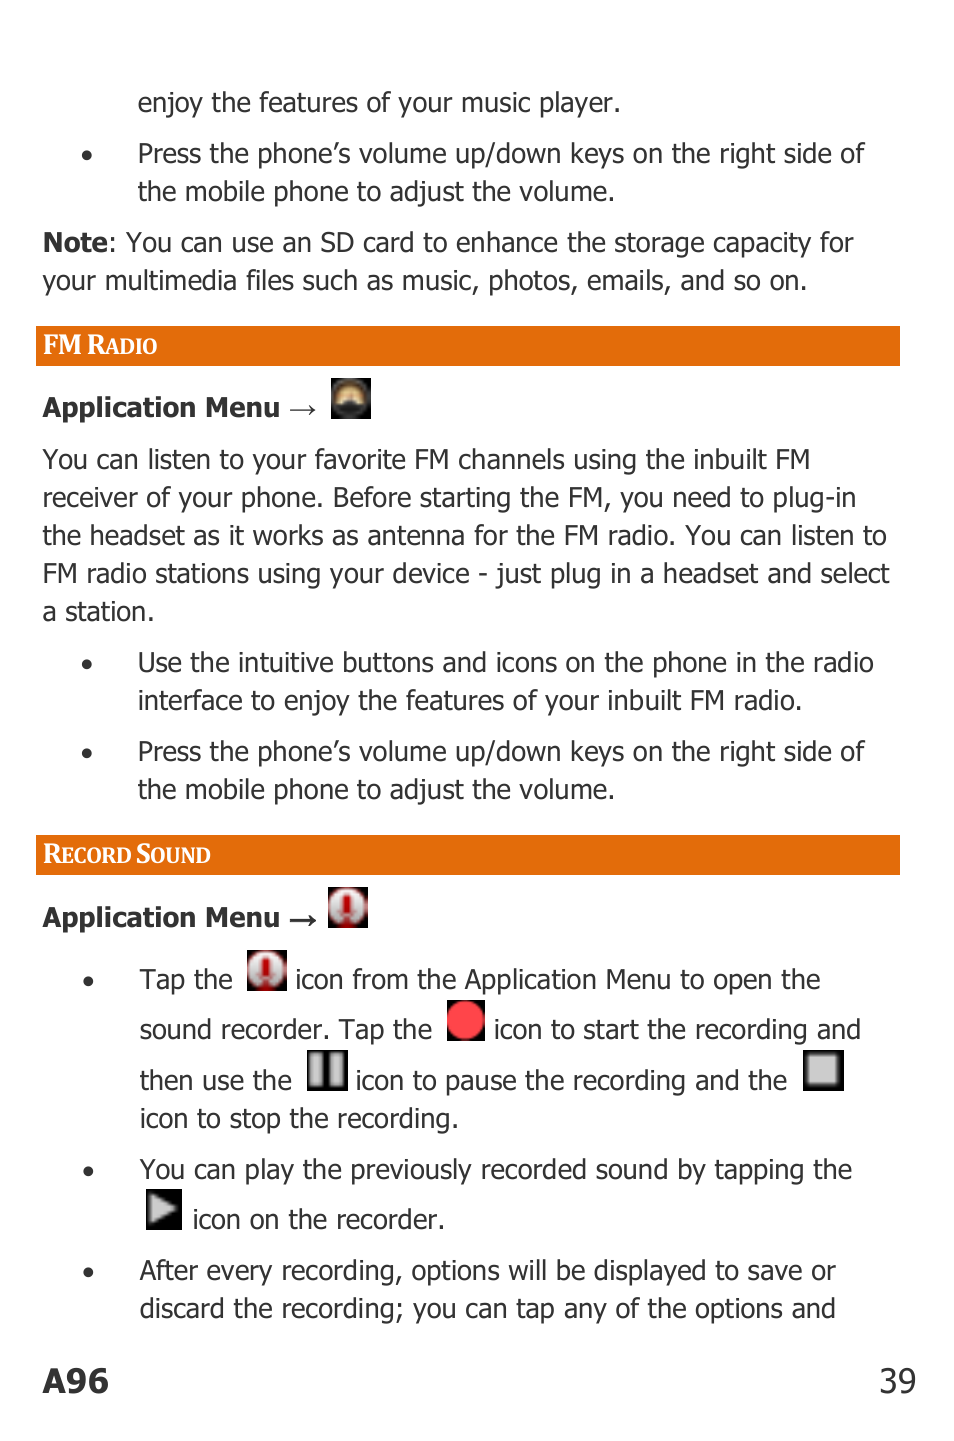 Adio, Ecord, Ound | A96 39 | Micromax Canvas Power User Manual | Page 39 / 56